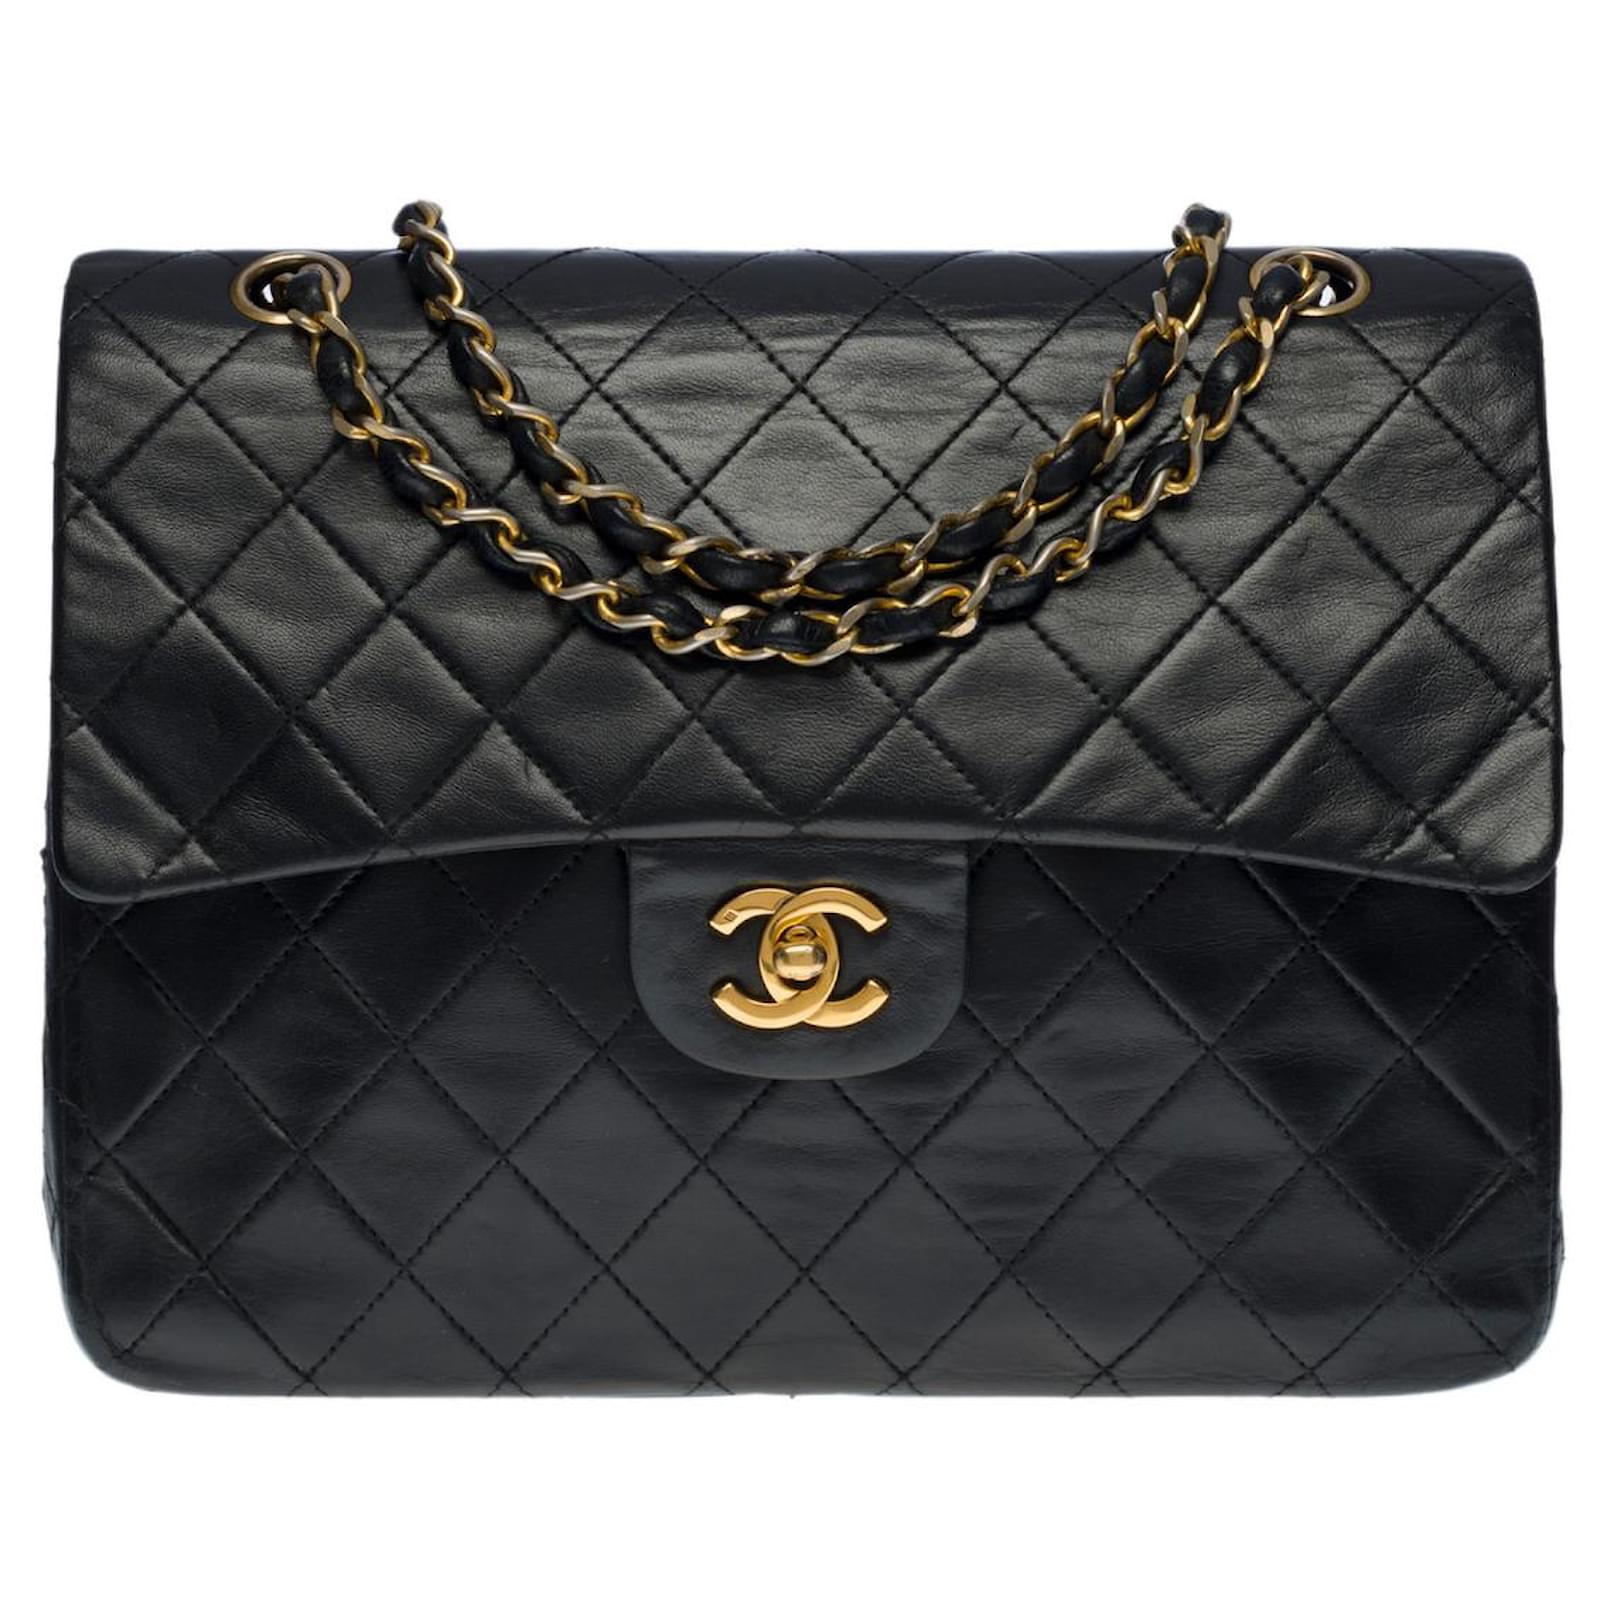 Handbags Chanel Chanel Timeless Shoulder bag/CLASSIQUE Medium Lined Flap in Black Quilted Lamb Leather- 100637